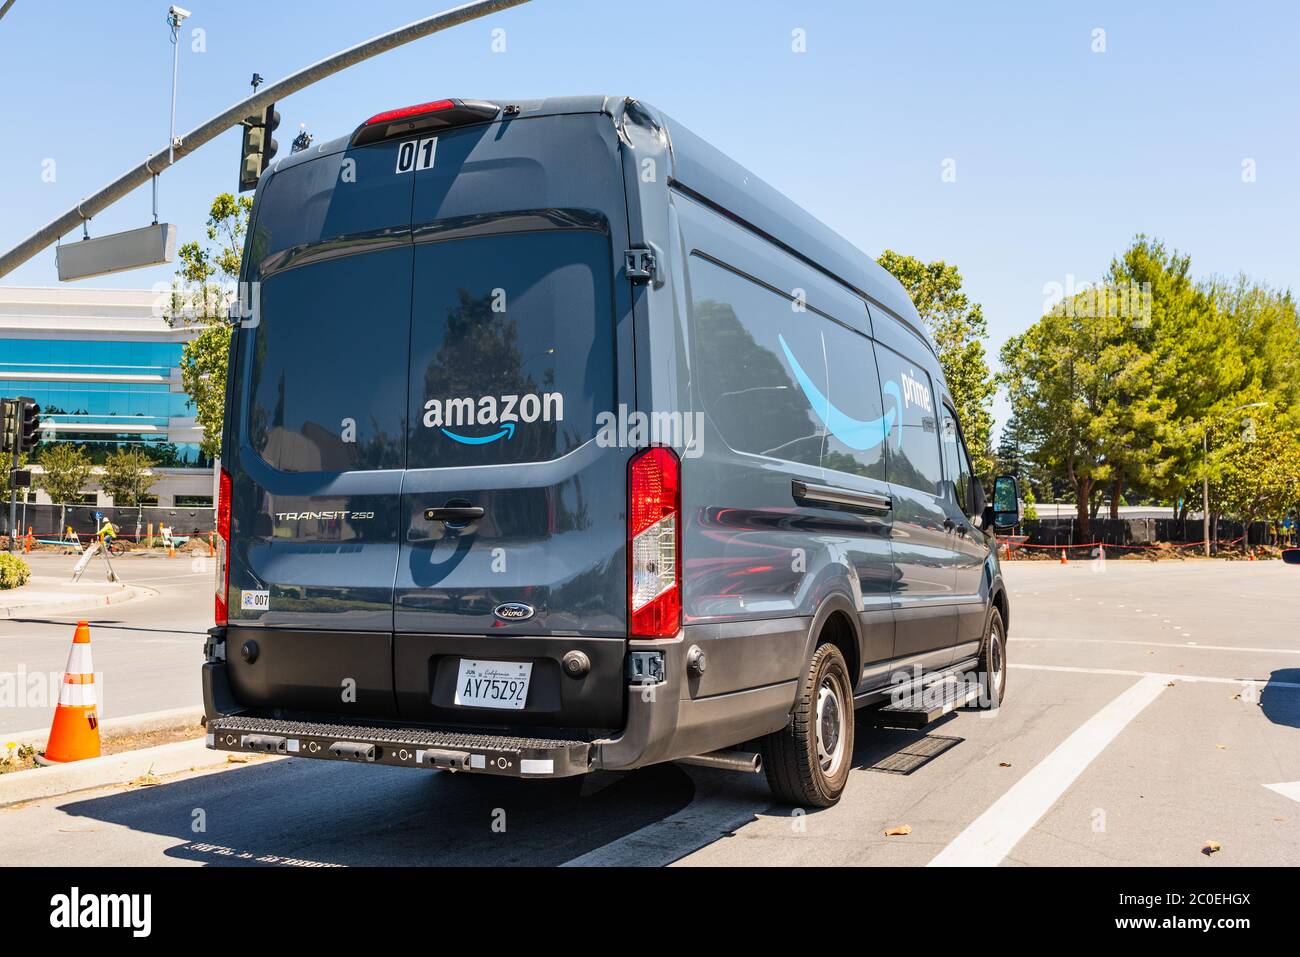 Amazon Prime Logo High Resolution Stock Photography and Images - Alamy